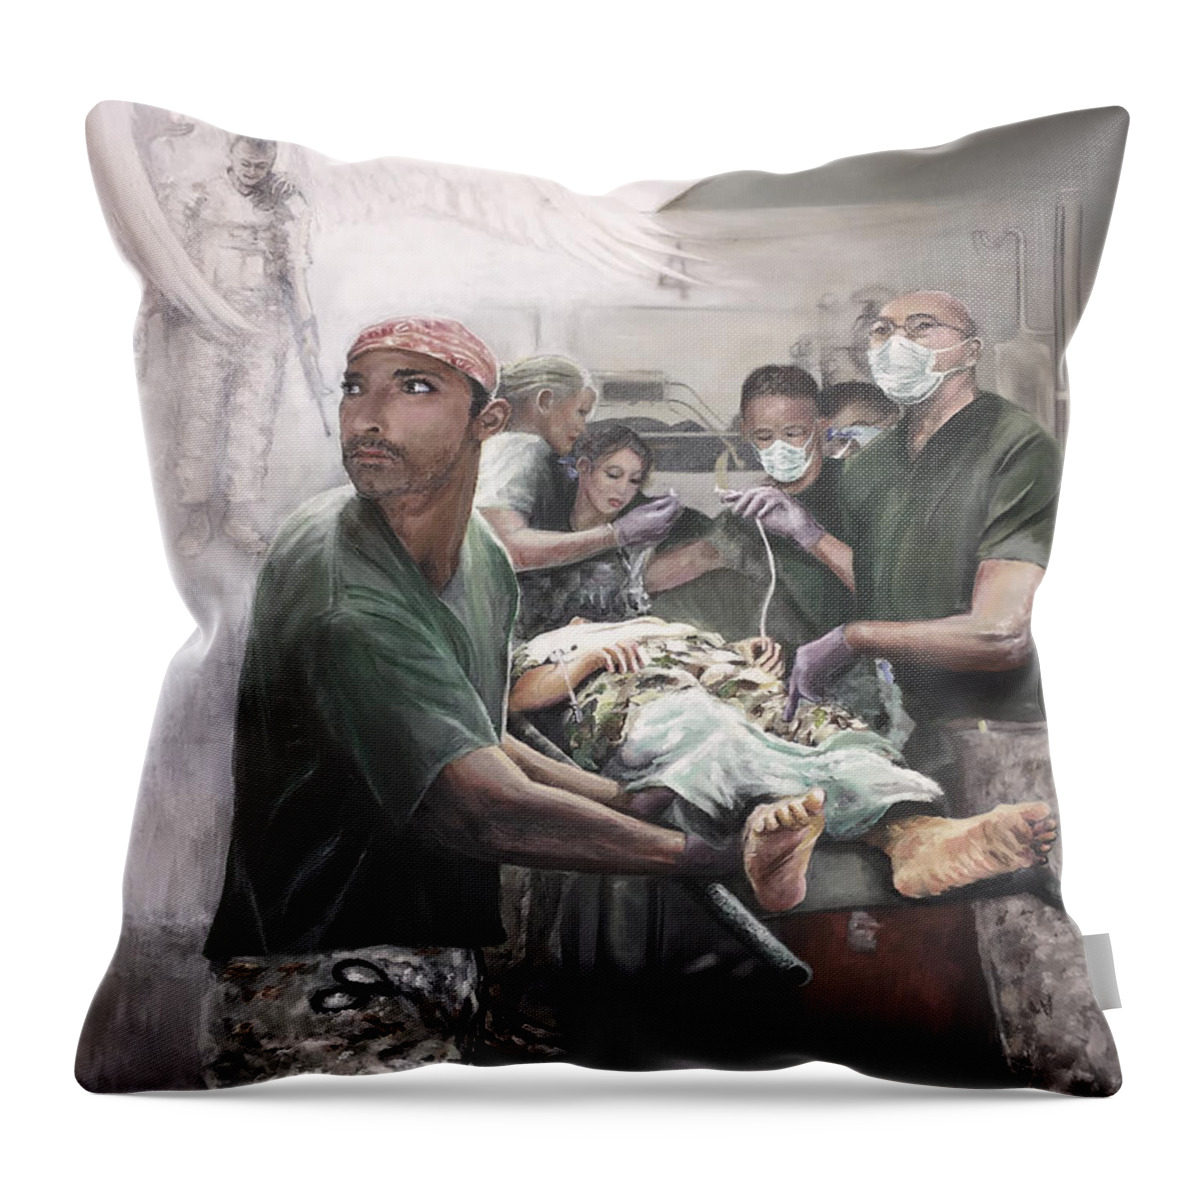 Military Art Throw Pillow featuring the painting Hero Ascending #1 by Todd Krasovetz